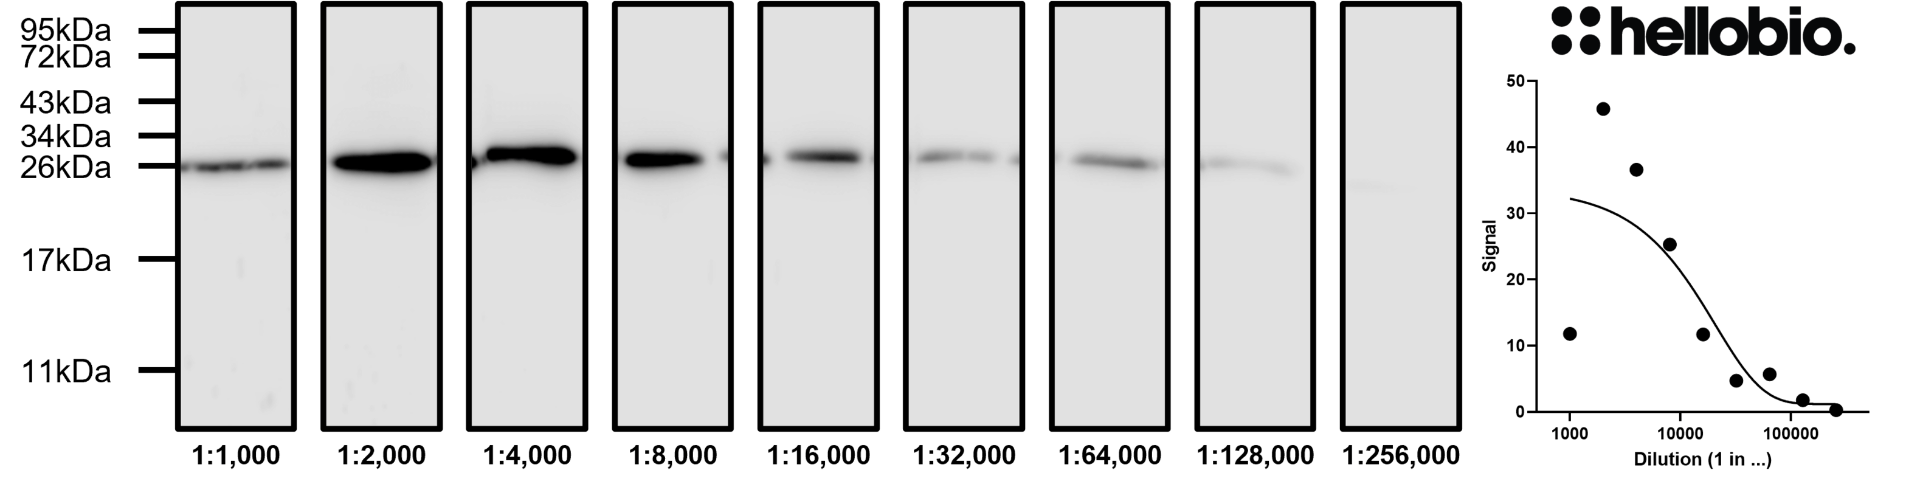 Figure 8. Concentration response of HB6494 staining in a rat brain cytosol preparation.